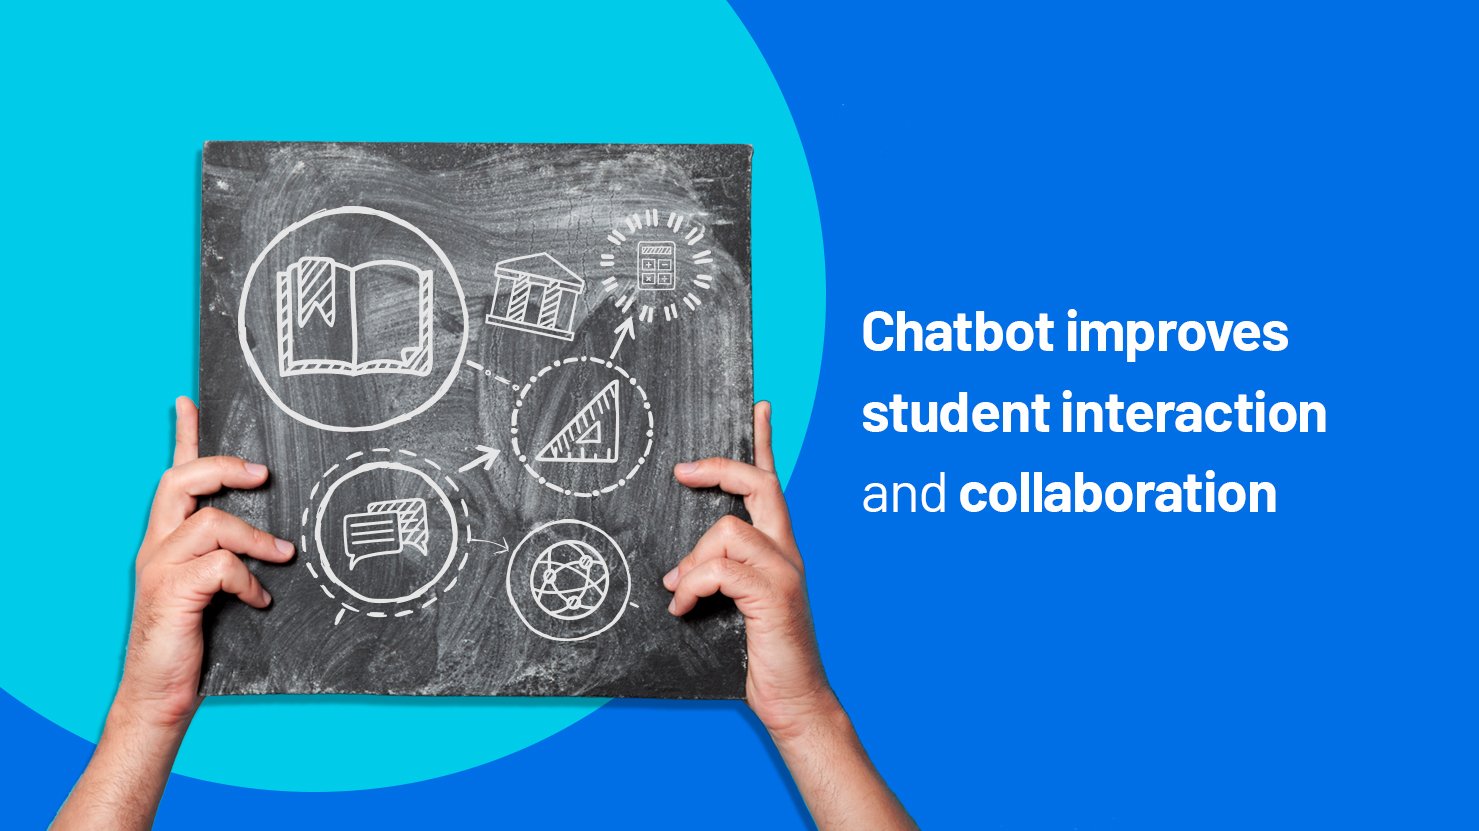 Chatbot improves student and learning experiences